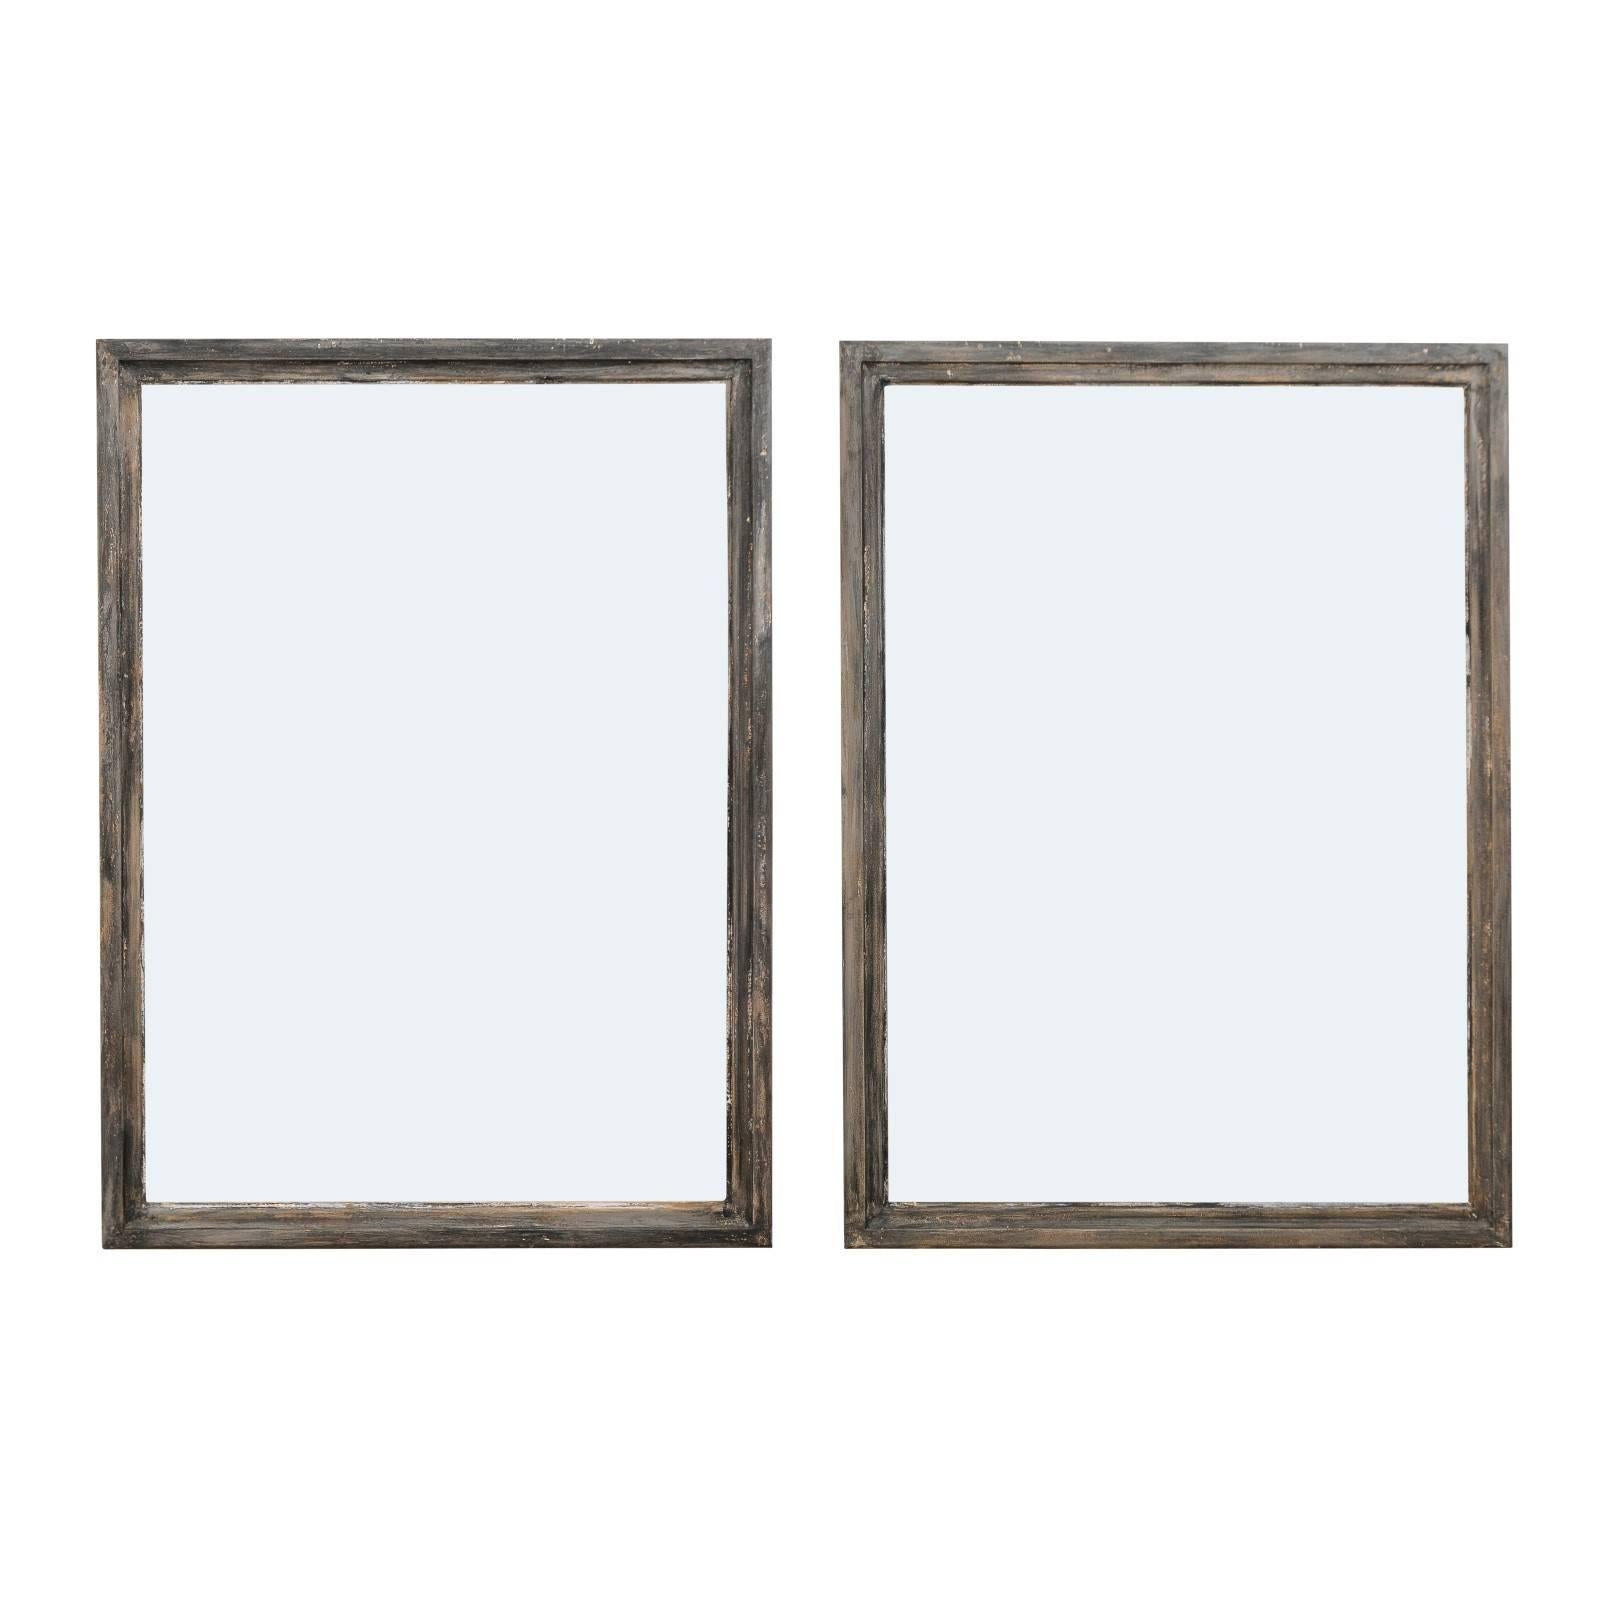 Pair of French Mid-Century Painted Wood Rectangular Mirrors, 5.25 Ft Tall